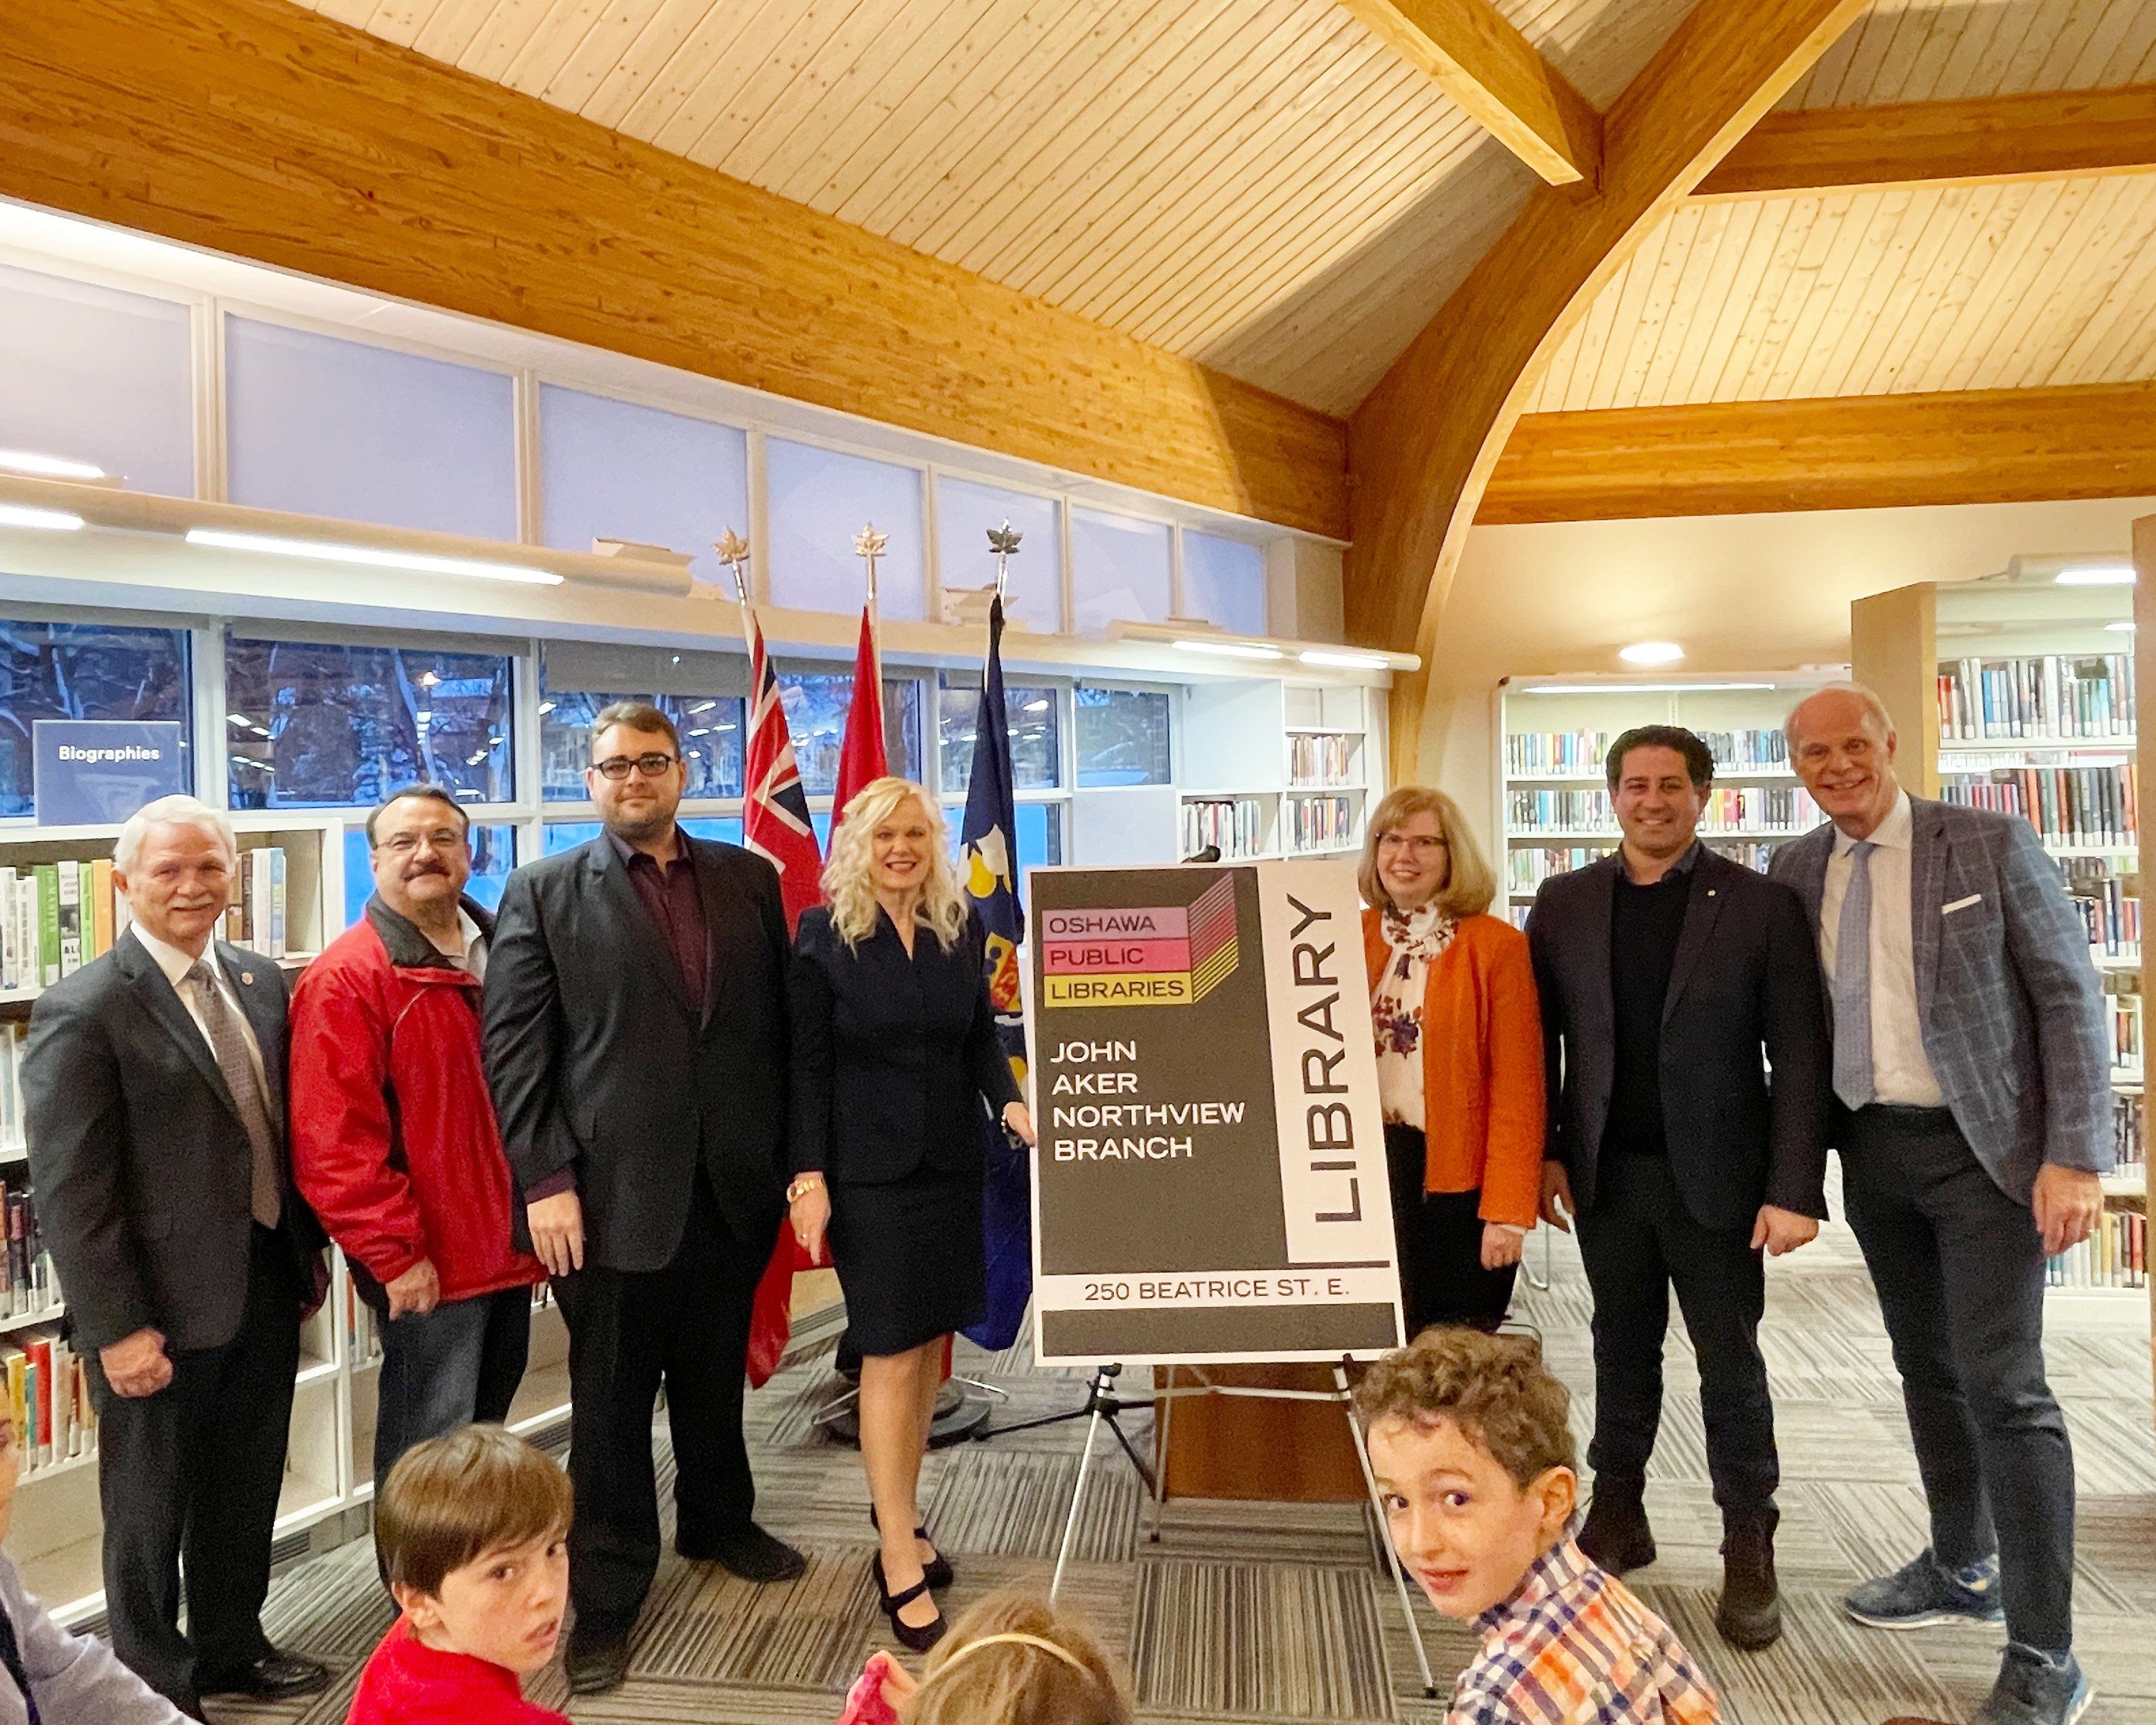 Members of Oshawa Council and representatives for the Oshawa Public Libraries were joined by family of the late Mr. John Aker to celebrate the official renaming of the Northview Library Branch to the John Aker Northview Branch. 